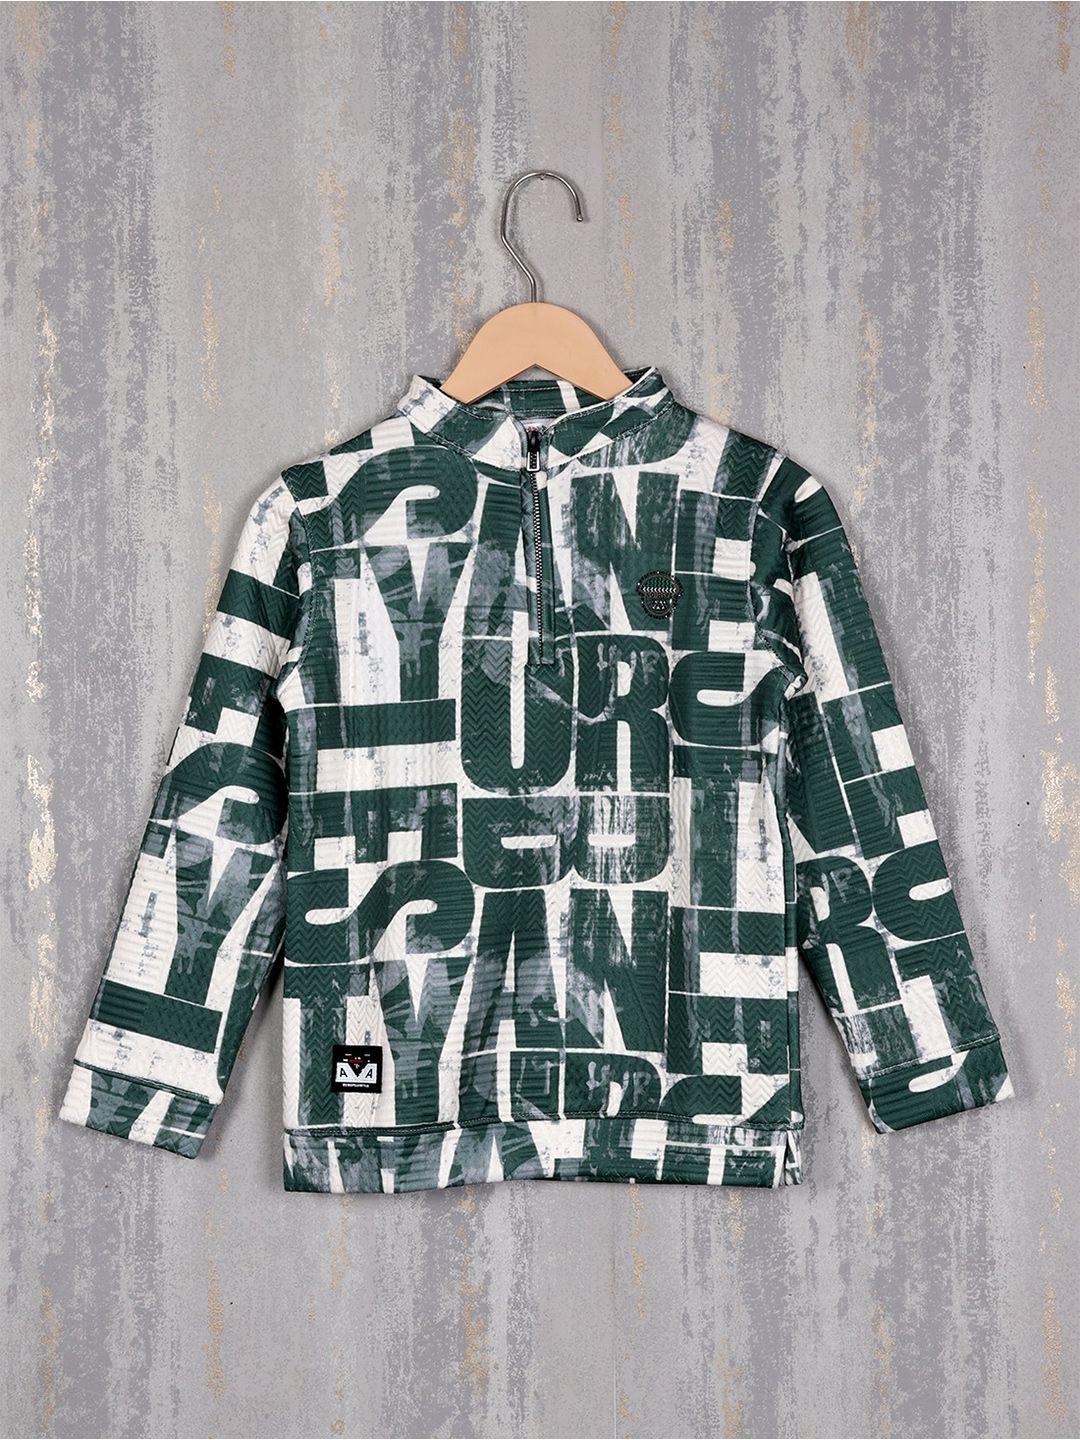 albion boys abstract printed pure cotton pullover sweatshirt